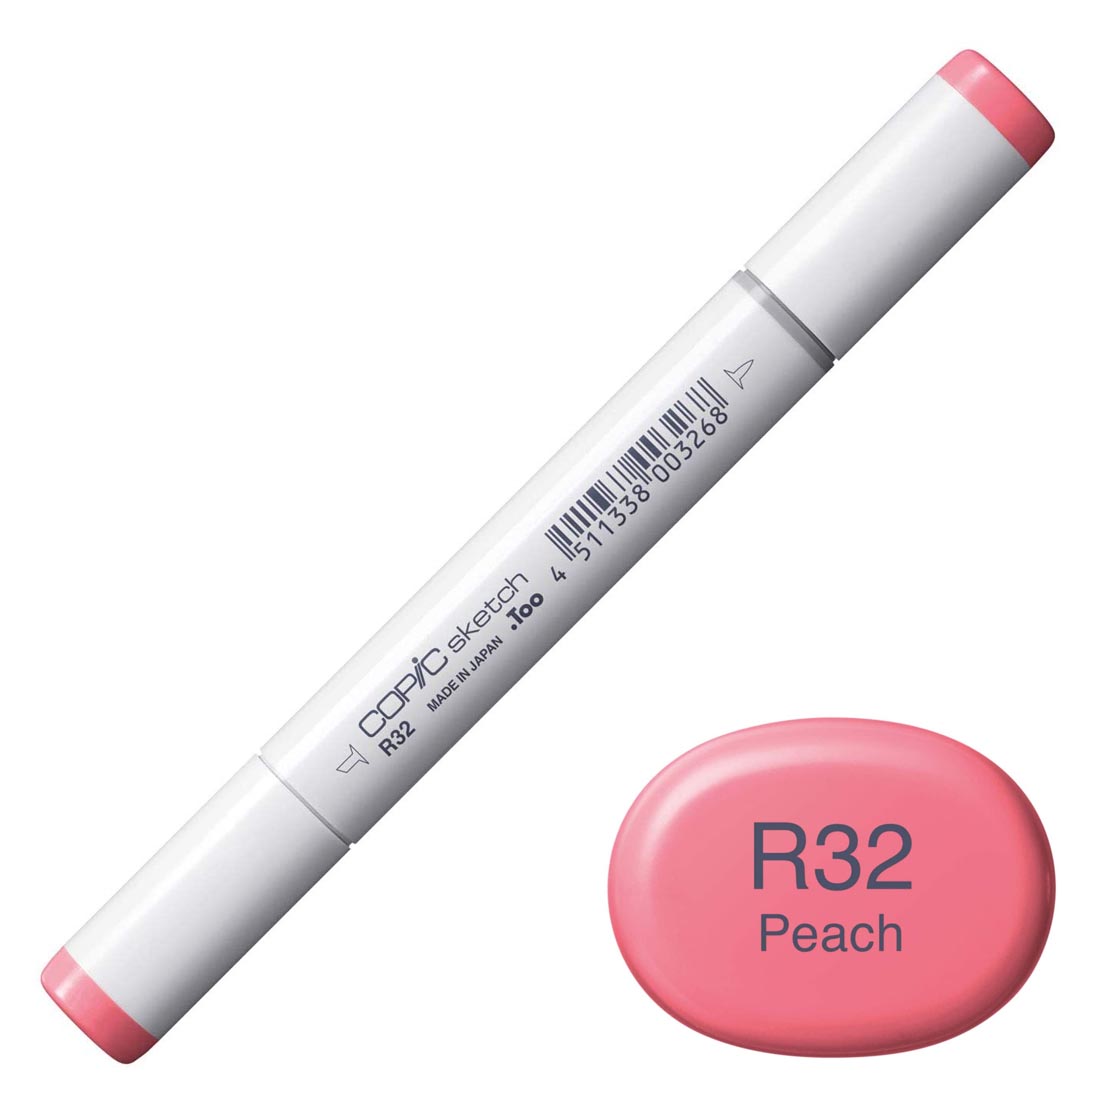 COPIC Sketch Marker with a color swatch and text of R32 Peach